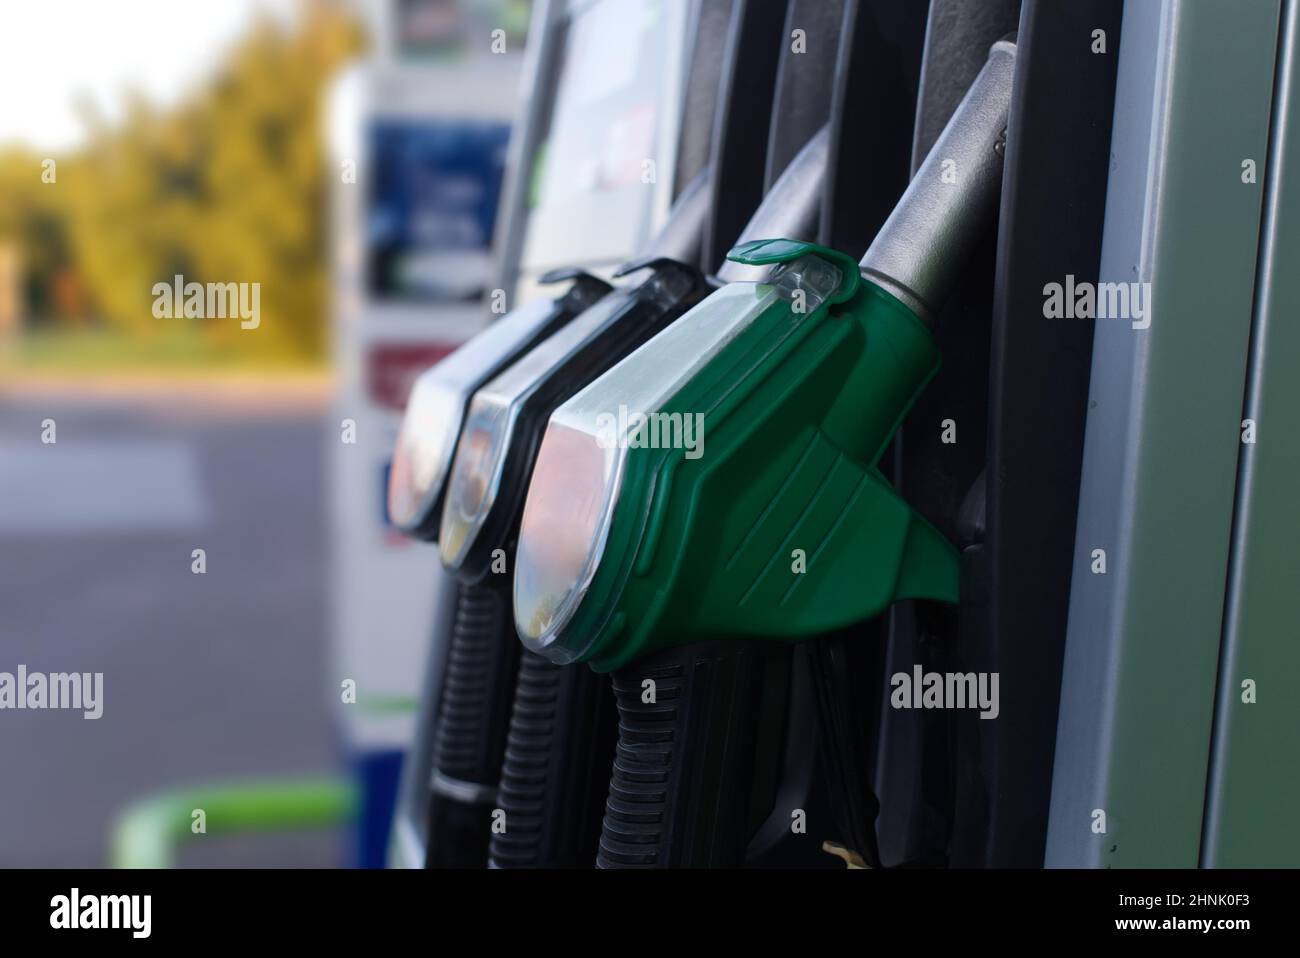 Fuel pumps station in close up Stock Photo